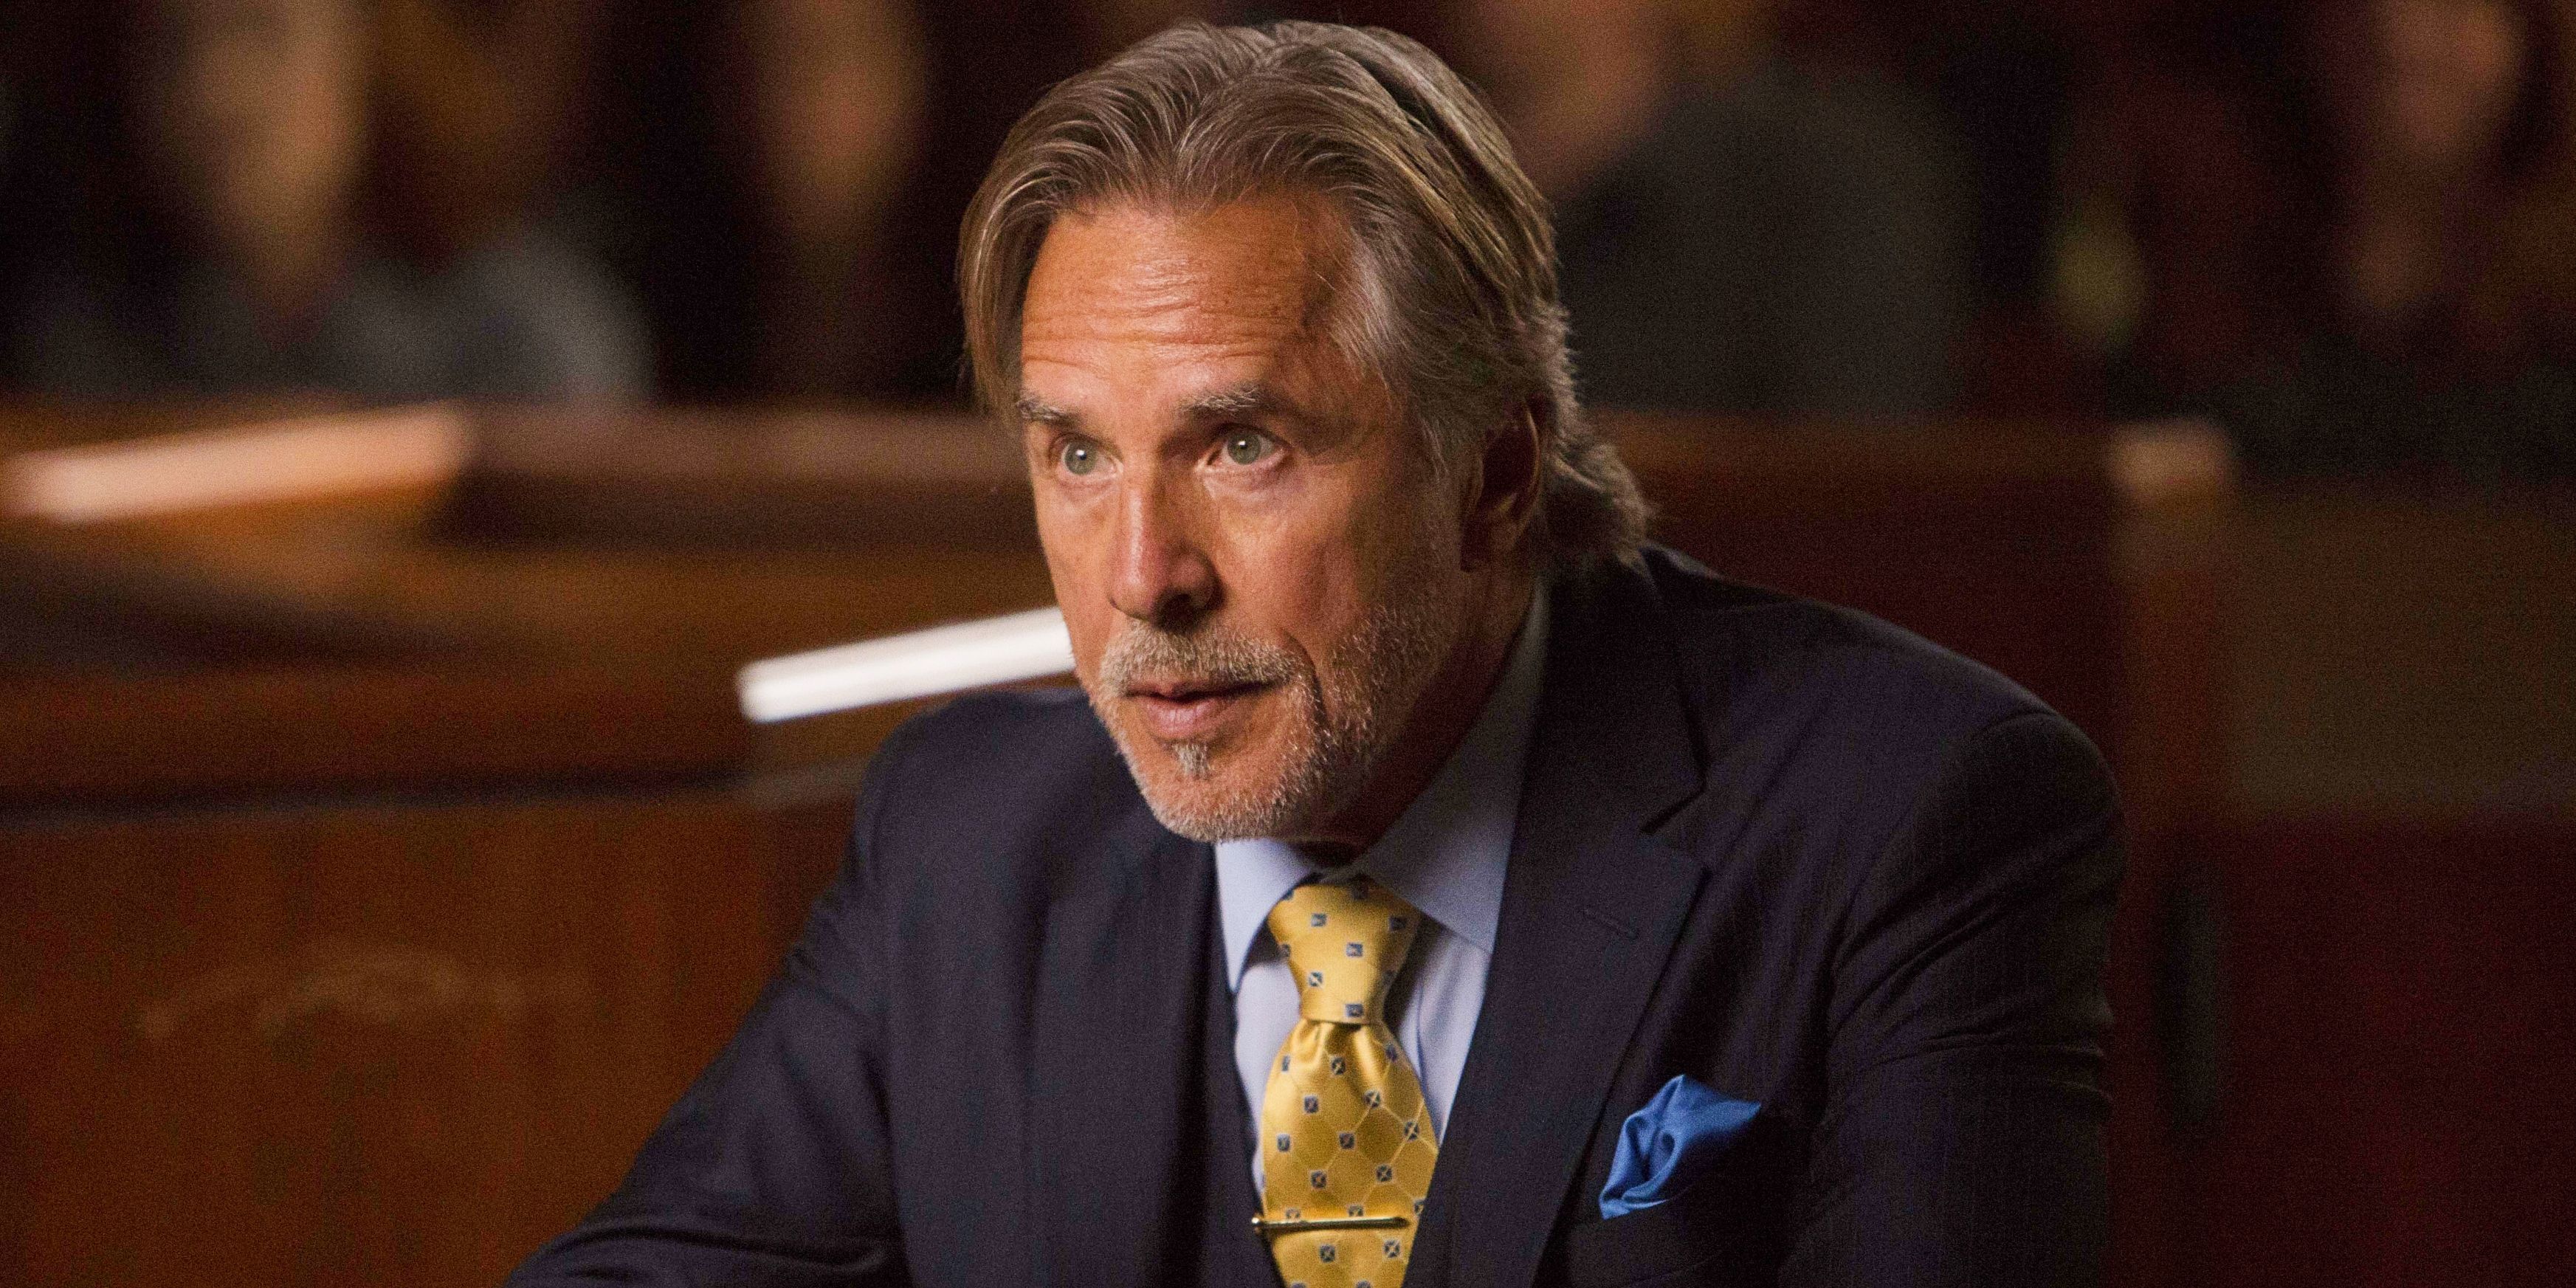 Don Johnson Joins Mighty Ducks Star in American Horror Story Creator's Medical Drama